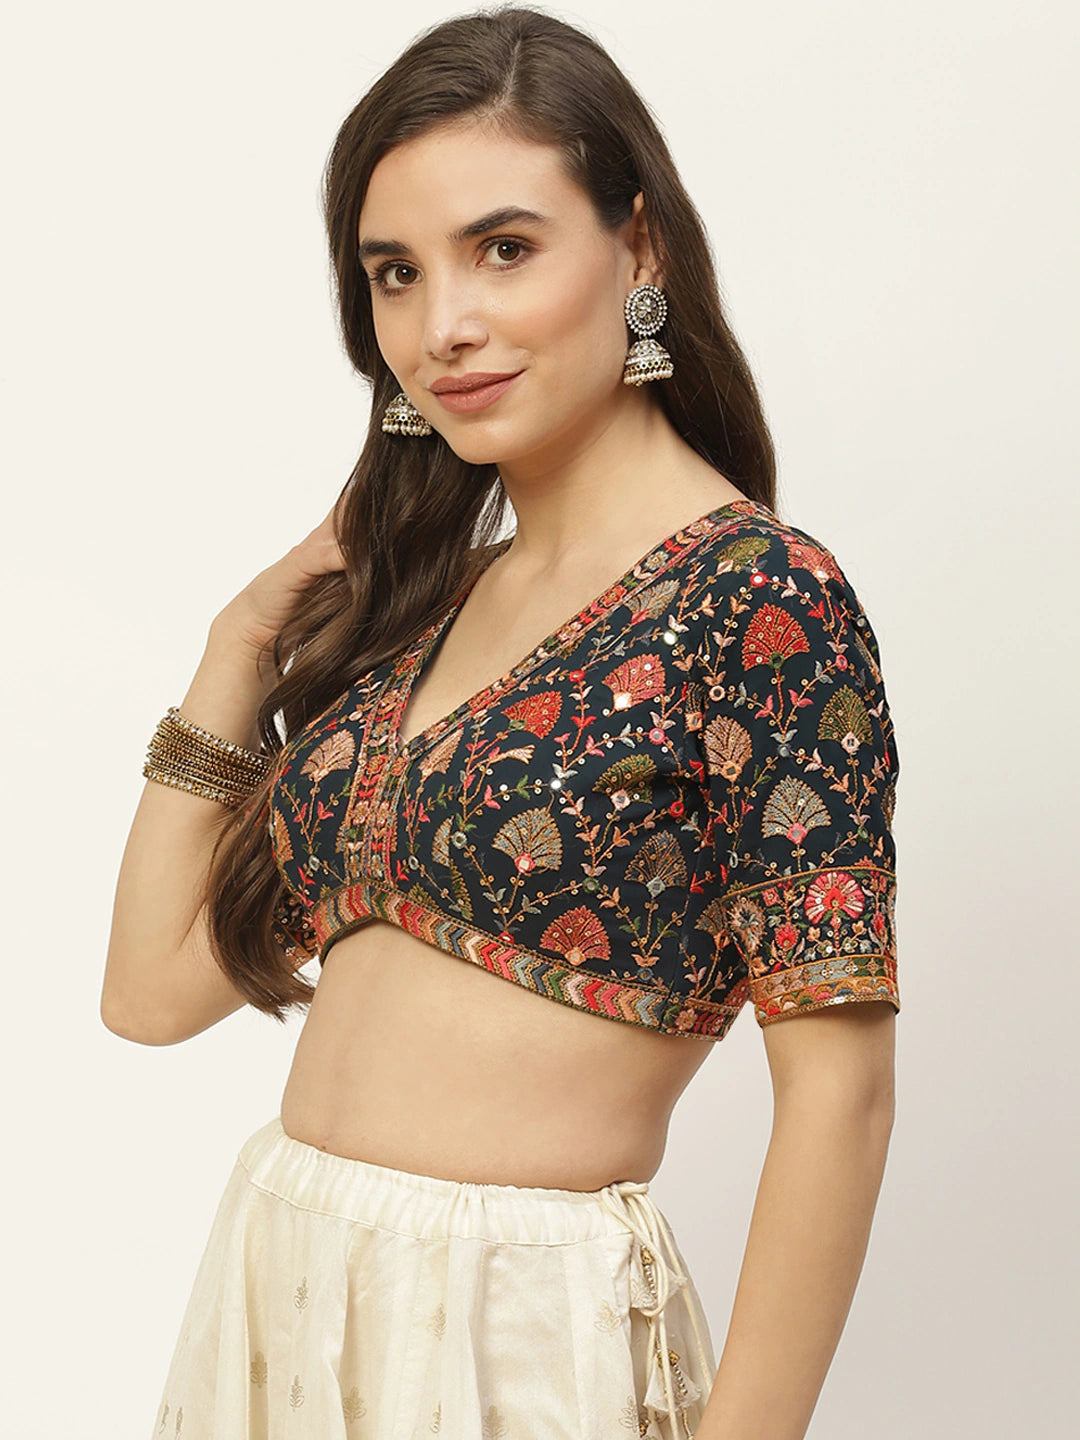 Multicolored Padded Blouse Indian Clothing in Denver, CO, Aurora, CO, Boulder, CO, Fort Collins, CO, Colorado Springs, CO, Parker, CO, Highlands Ranch, CO, Cherry Creek, CO, Centennial, CO, and Longmont, CO. NATIONWIDE SHIPPING USA- India Fashion X